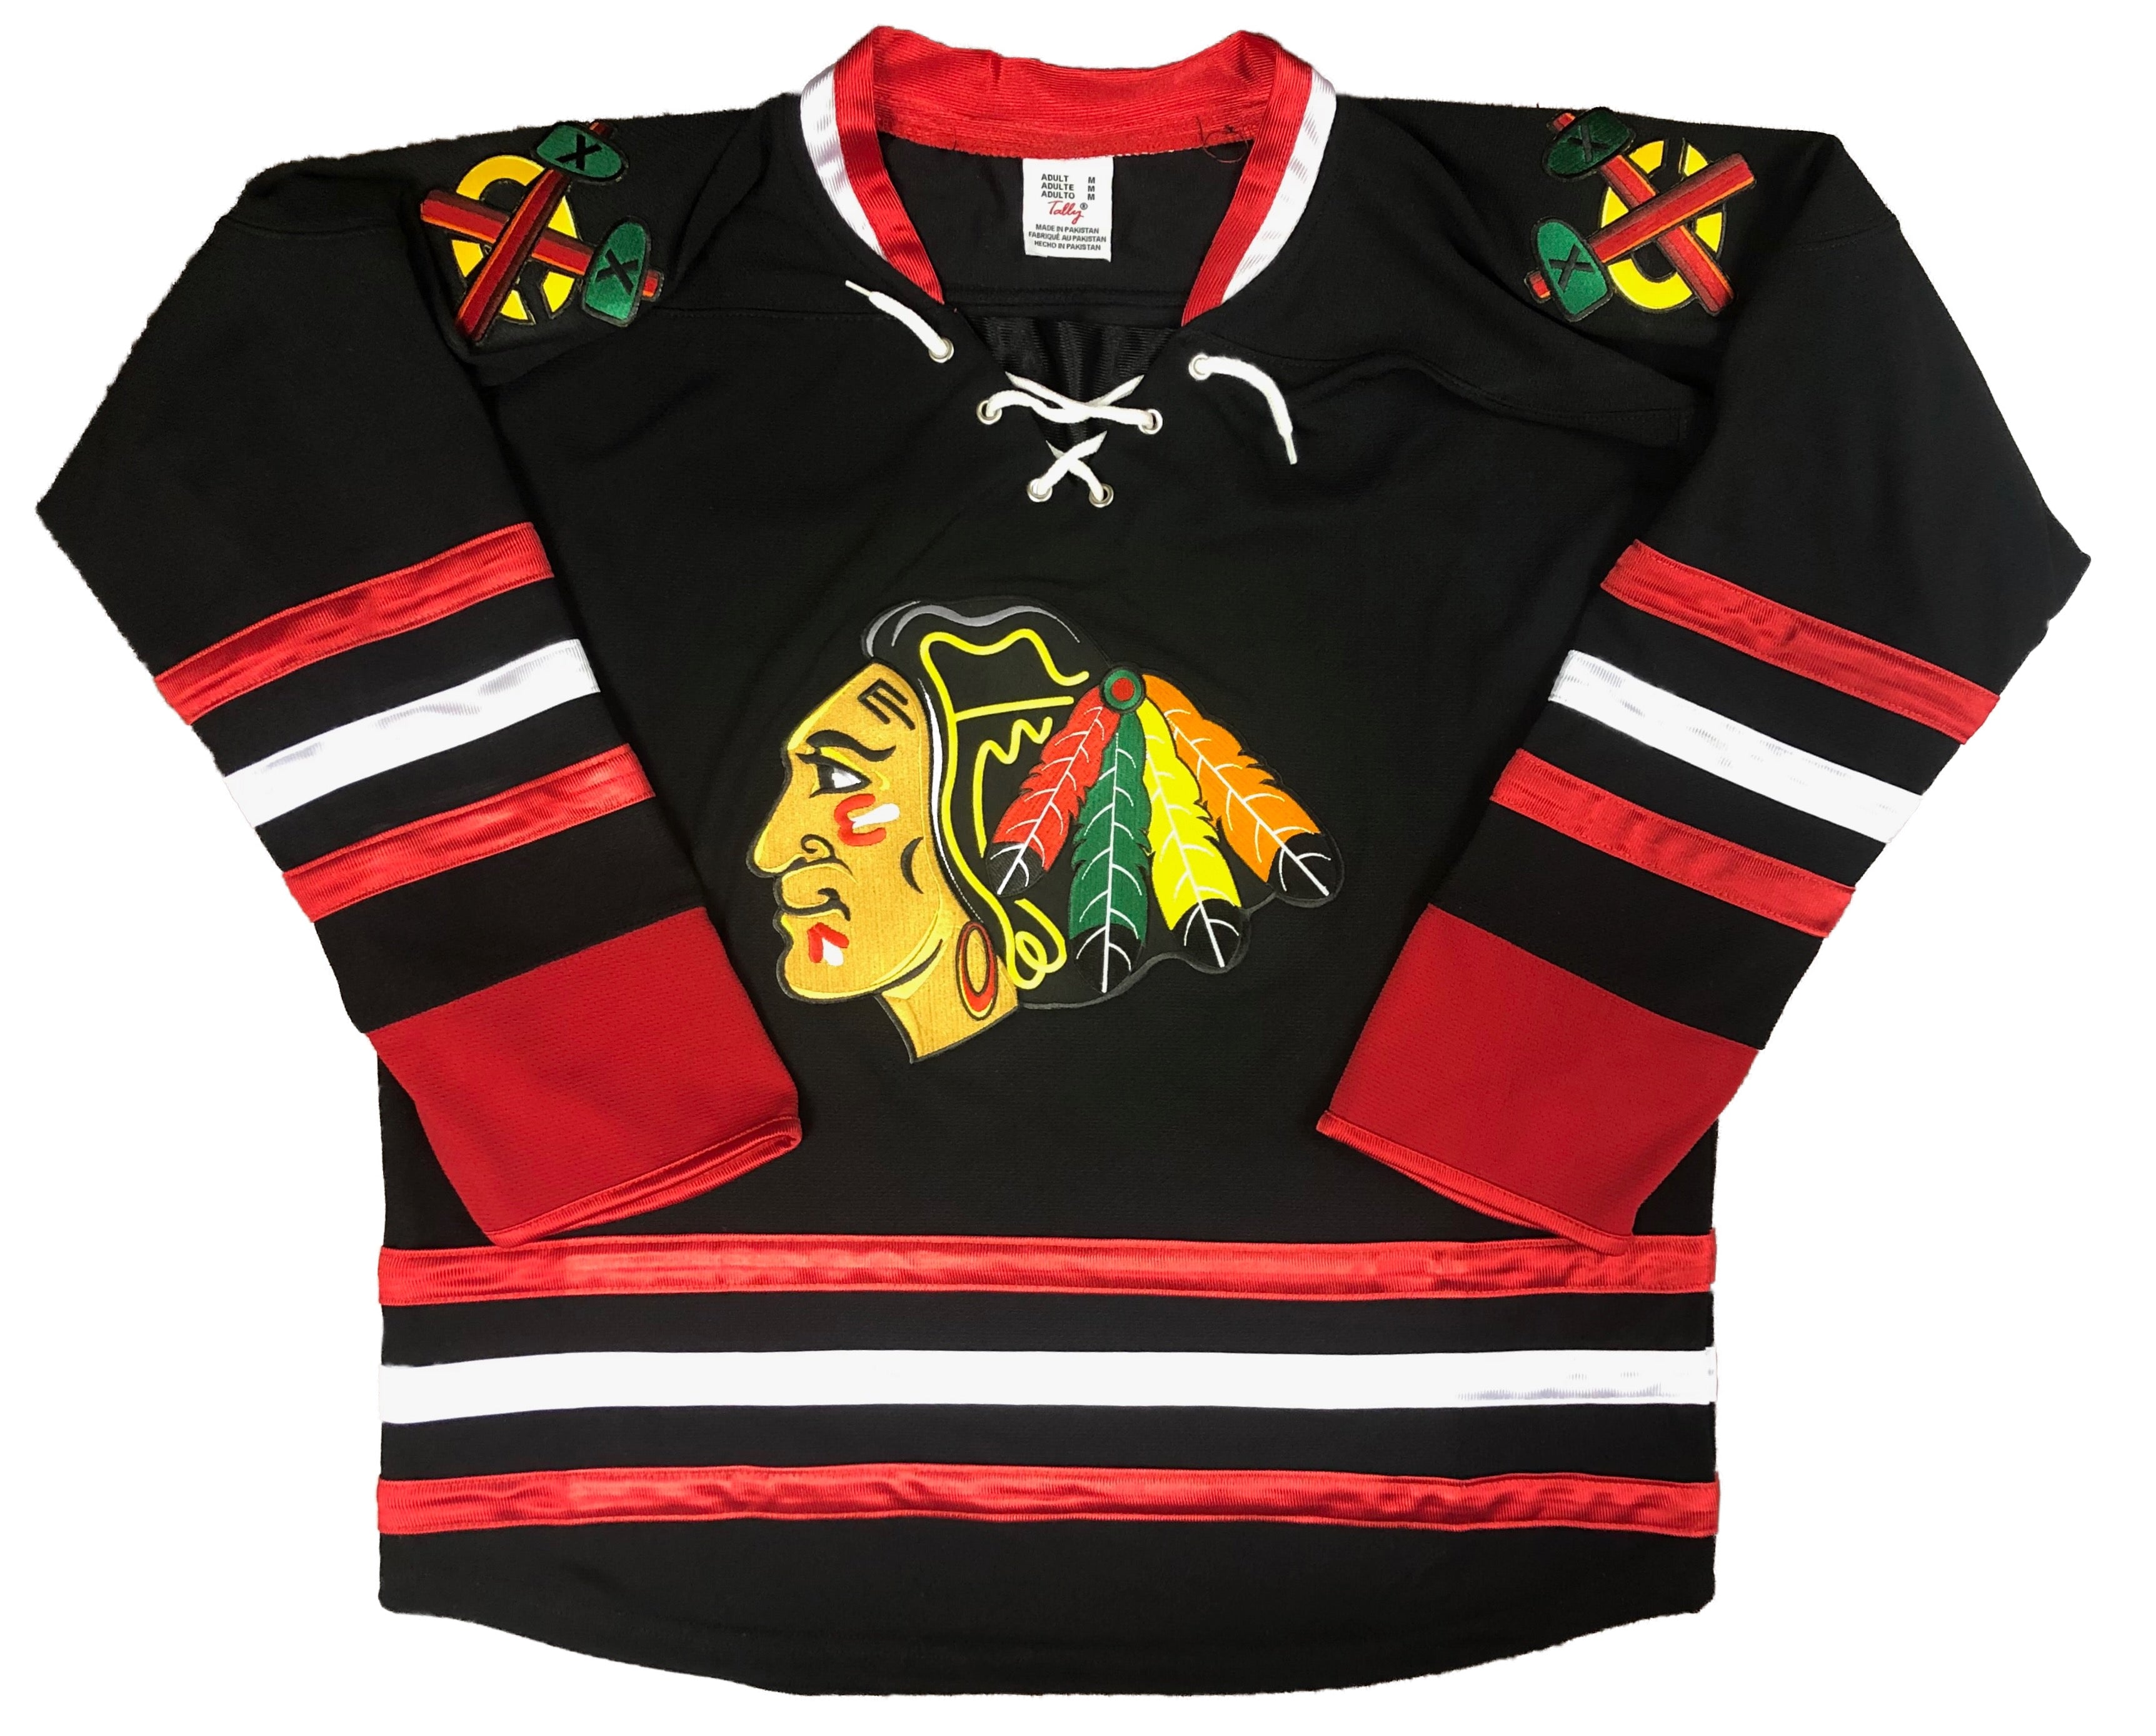 Custom Hockey Jerseys with A Blackhawk Logo and Shoulder Patches Adult Large / (name and Number on Back and Sleeves) / Red